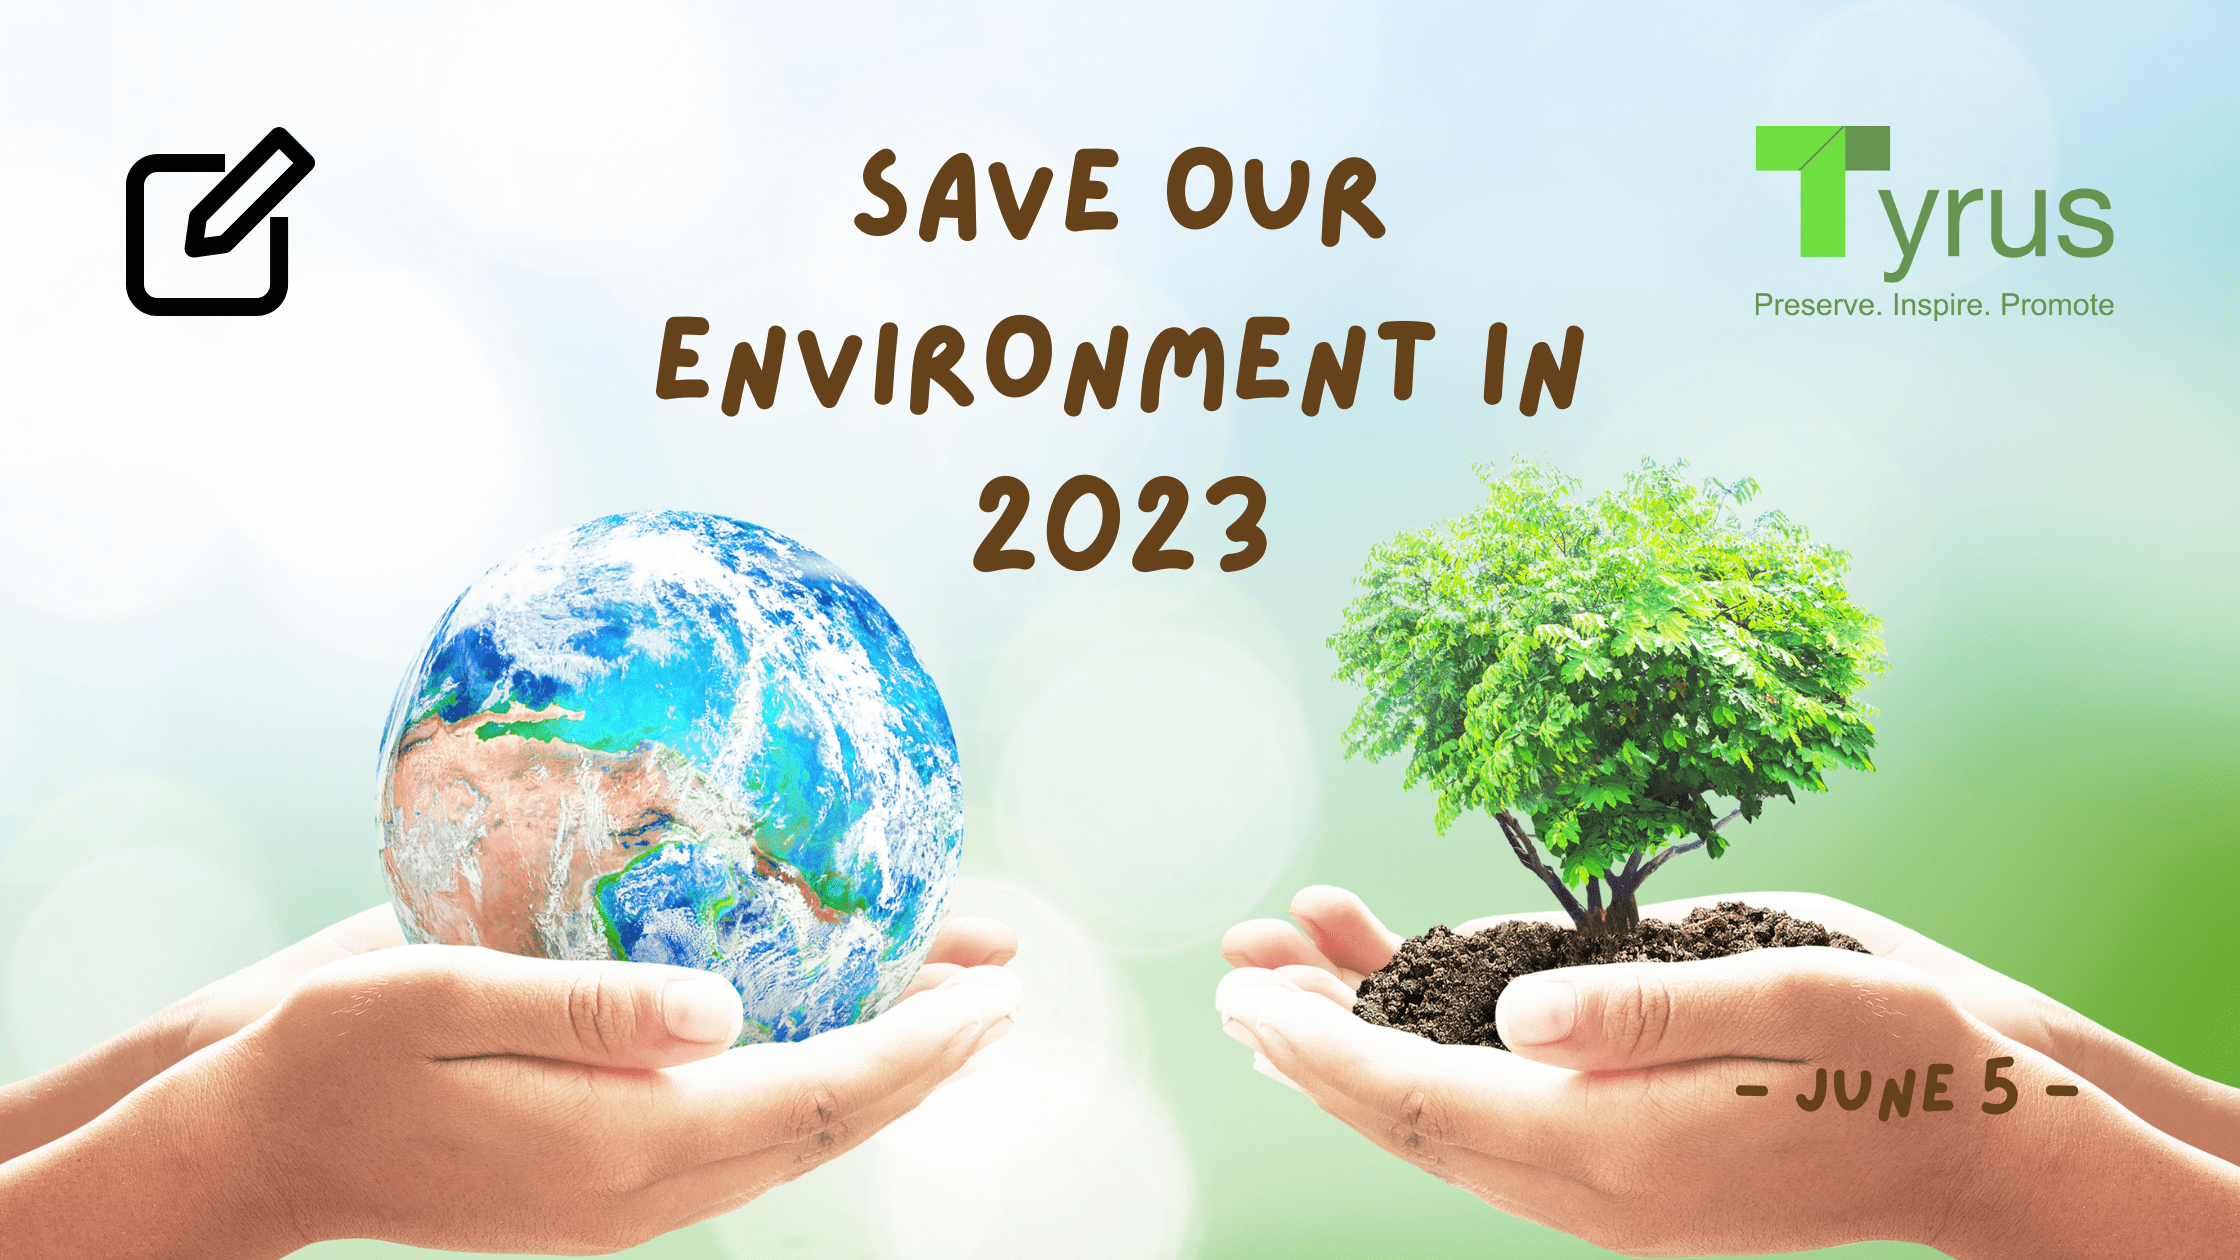 Save our environment in 2023